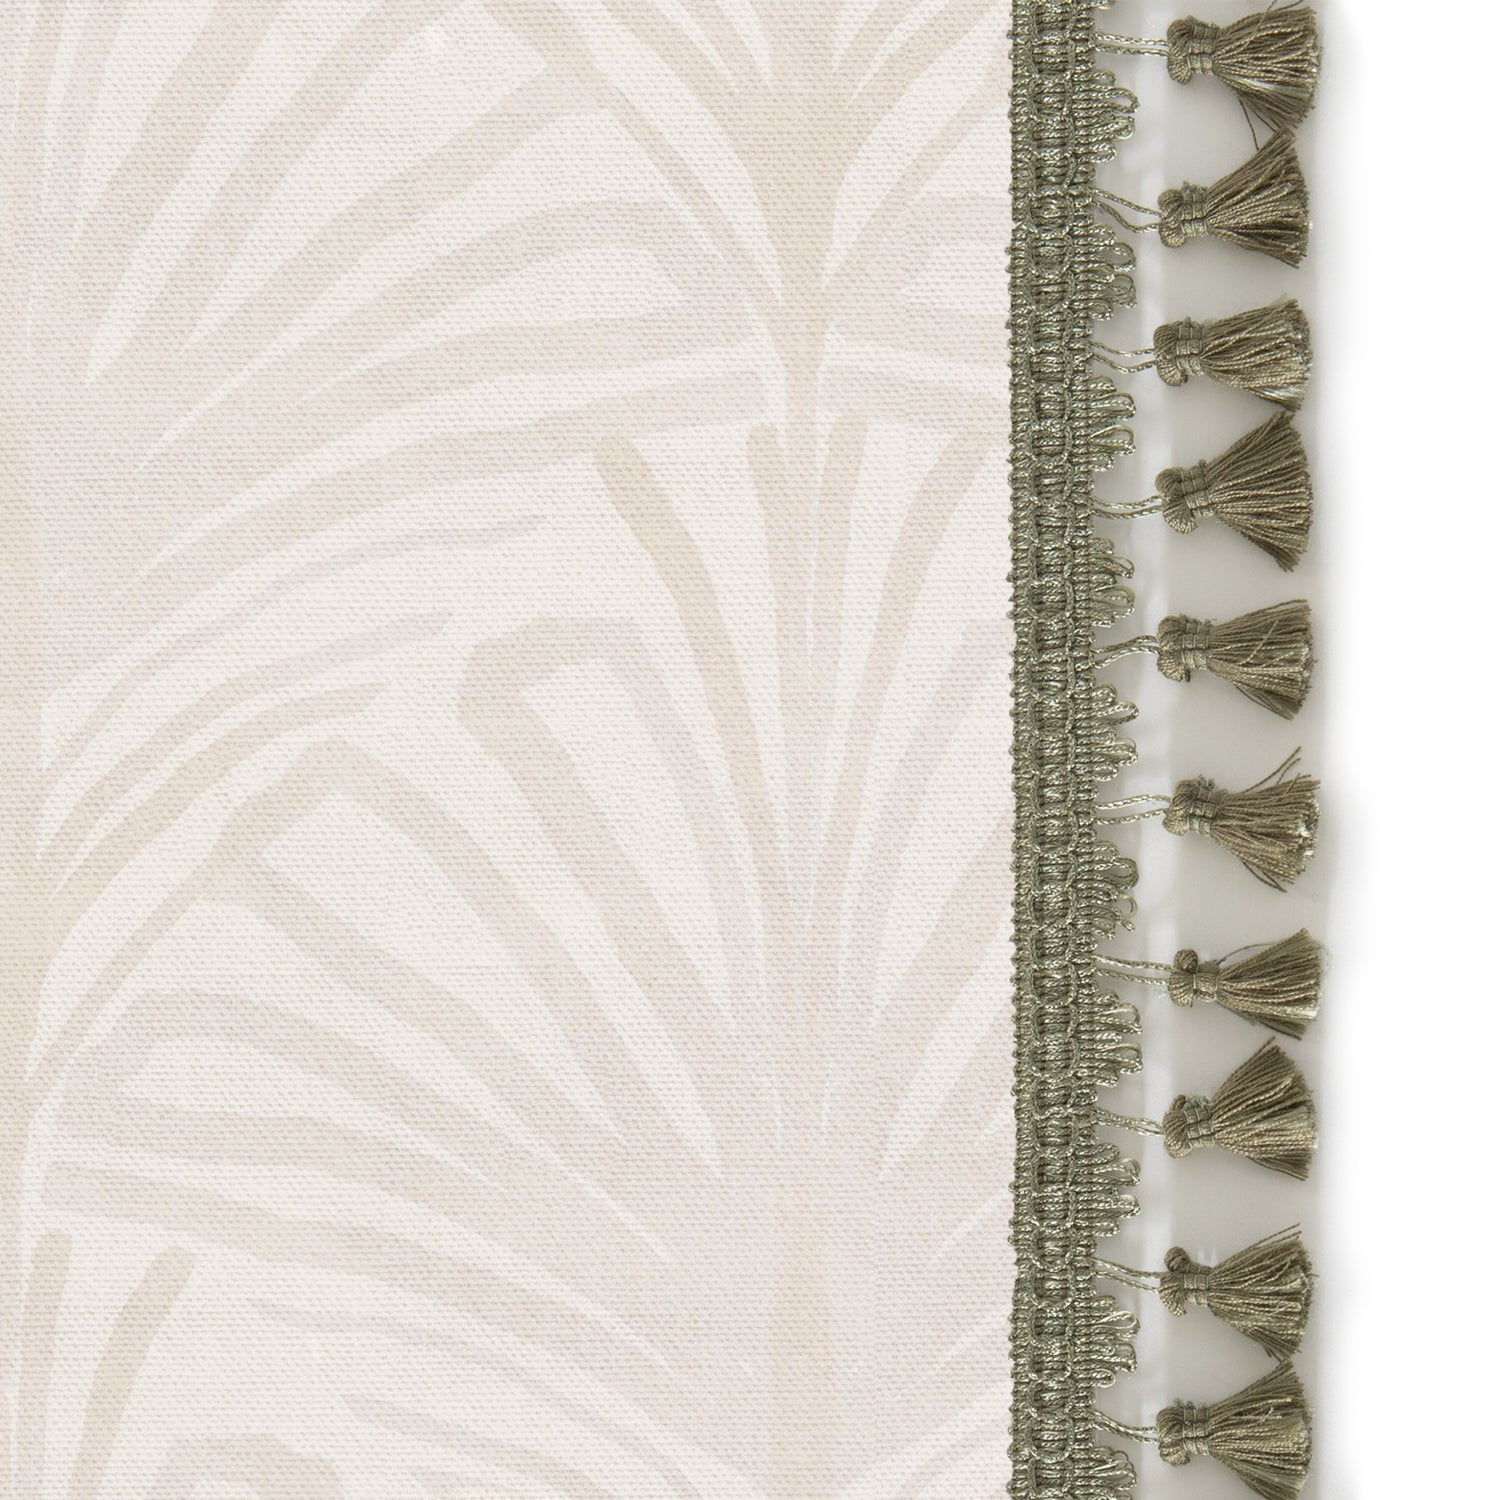 Upclose picture of Suzy Sand custom Beige Palmshower curtain with sage tassel trim